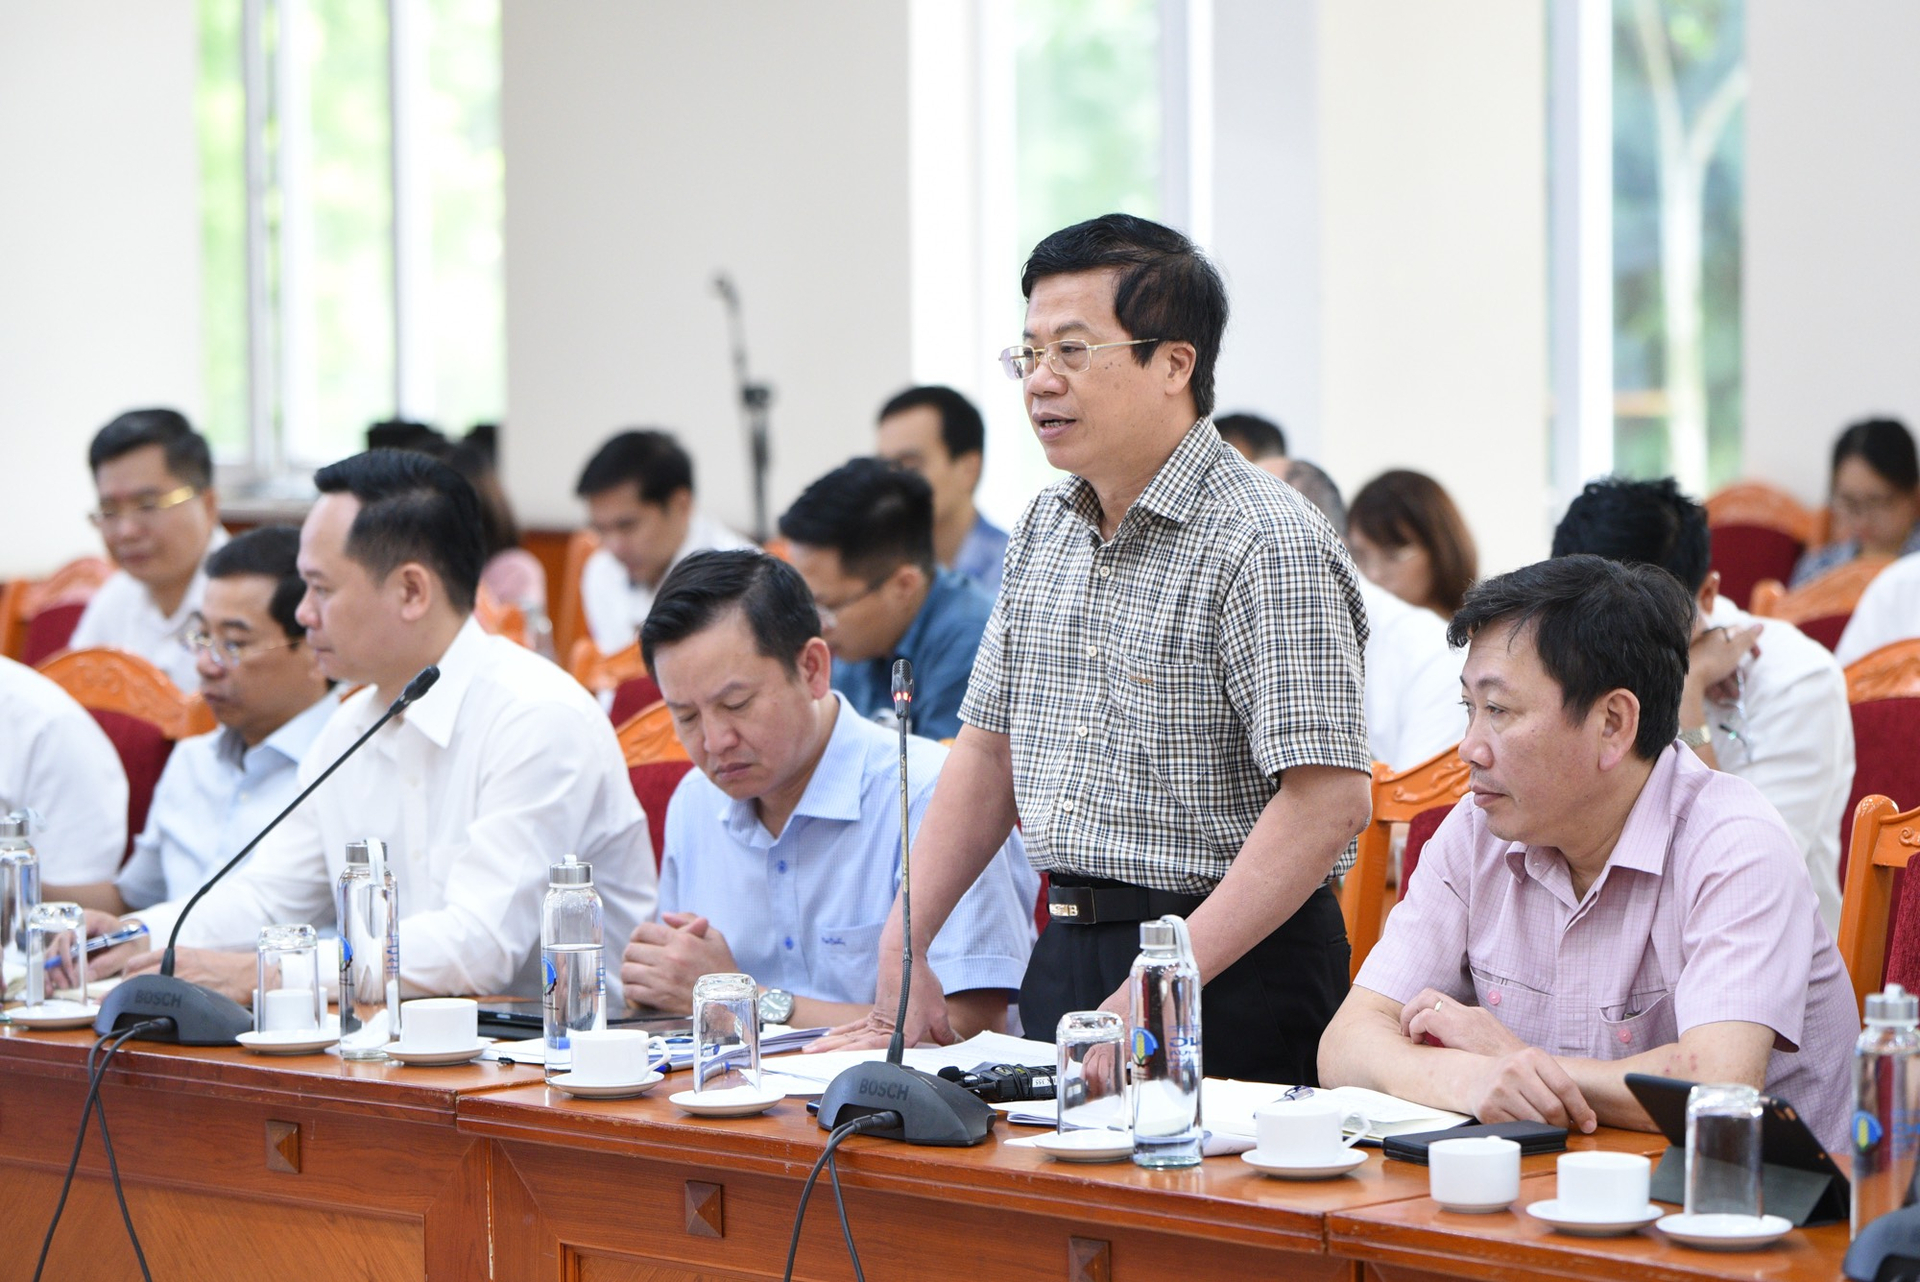 Representatives of the Department of Livestock Production proposed solutions to master breeding technology, feed, and processing. Photo: Tung Dinh. 